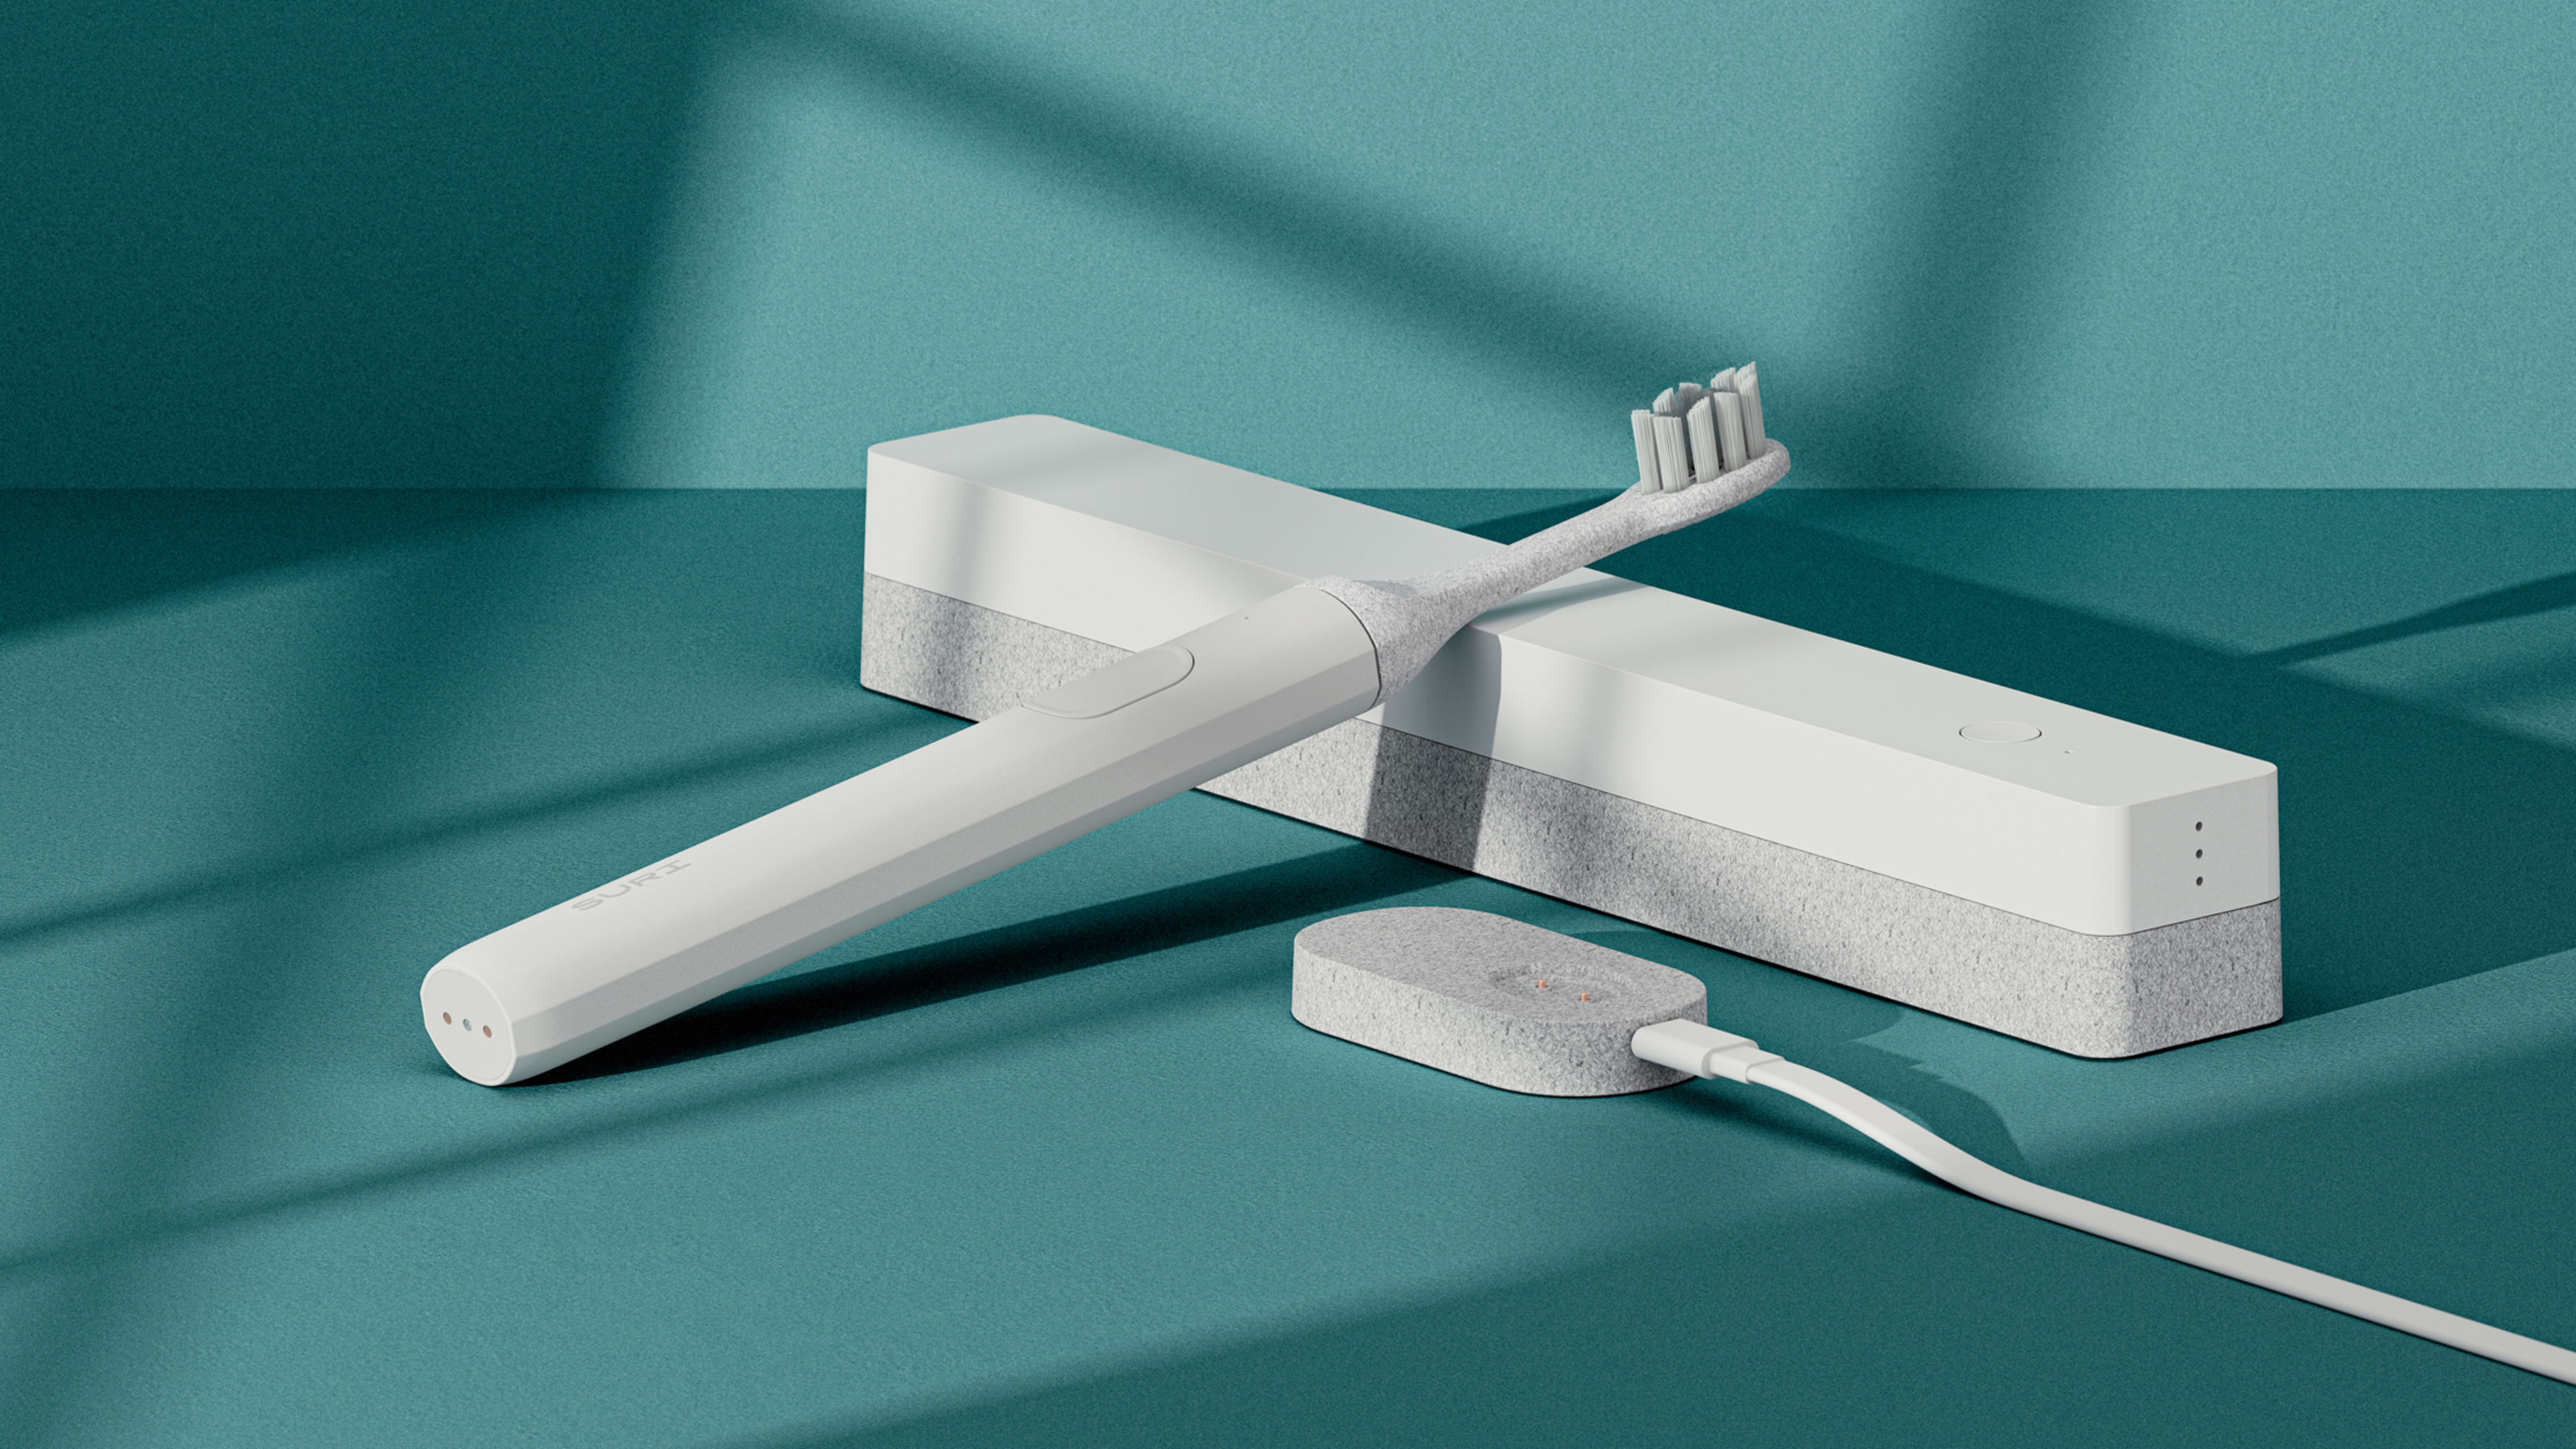 This startup redesigned the electric toothbrush to make it repairable and recyclable